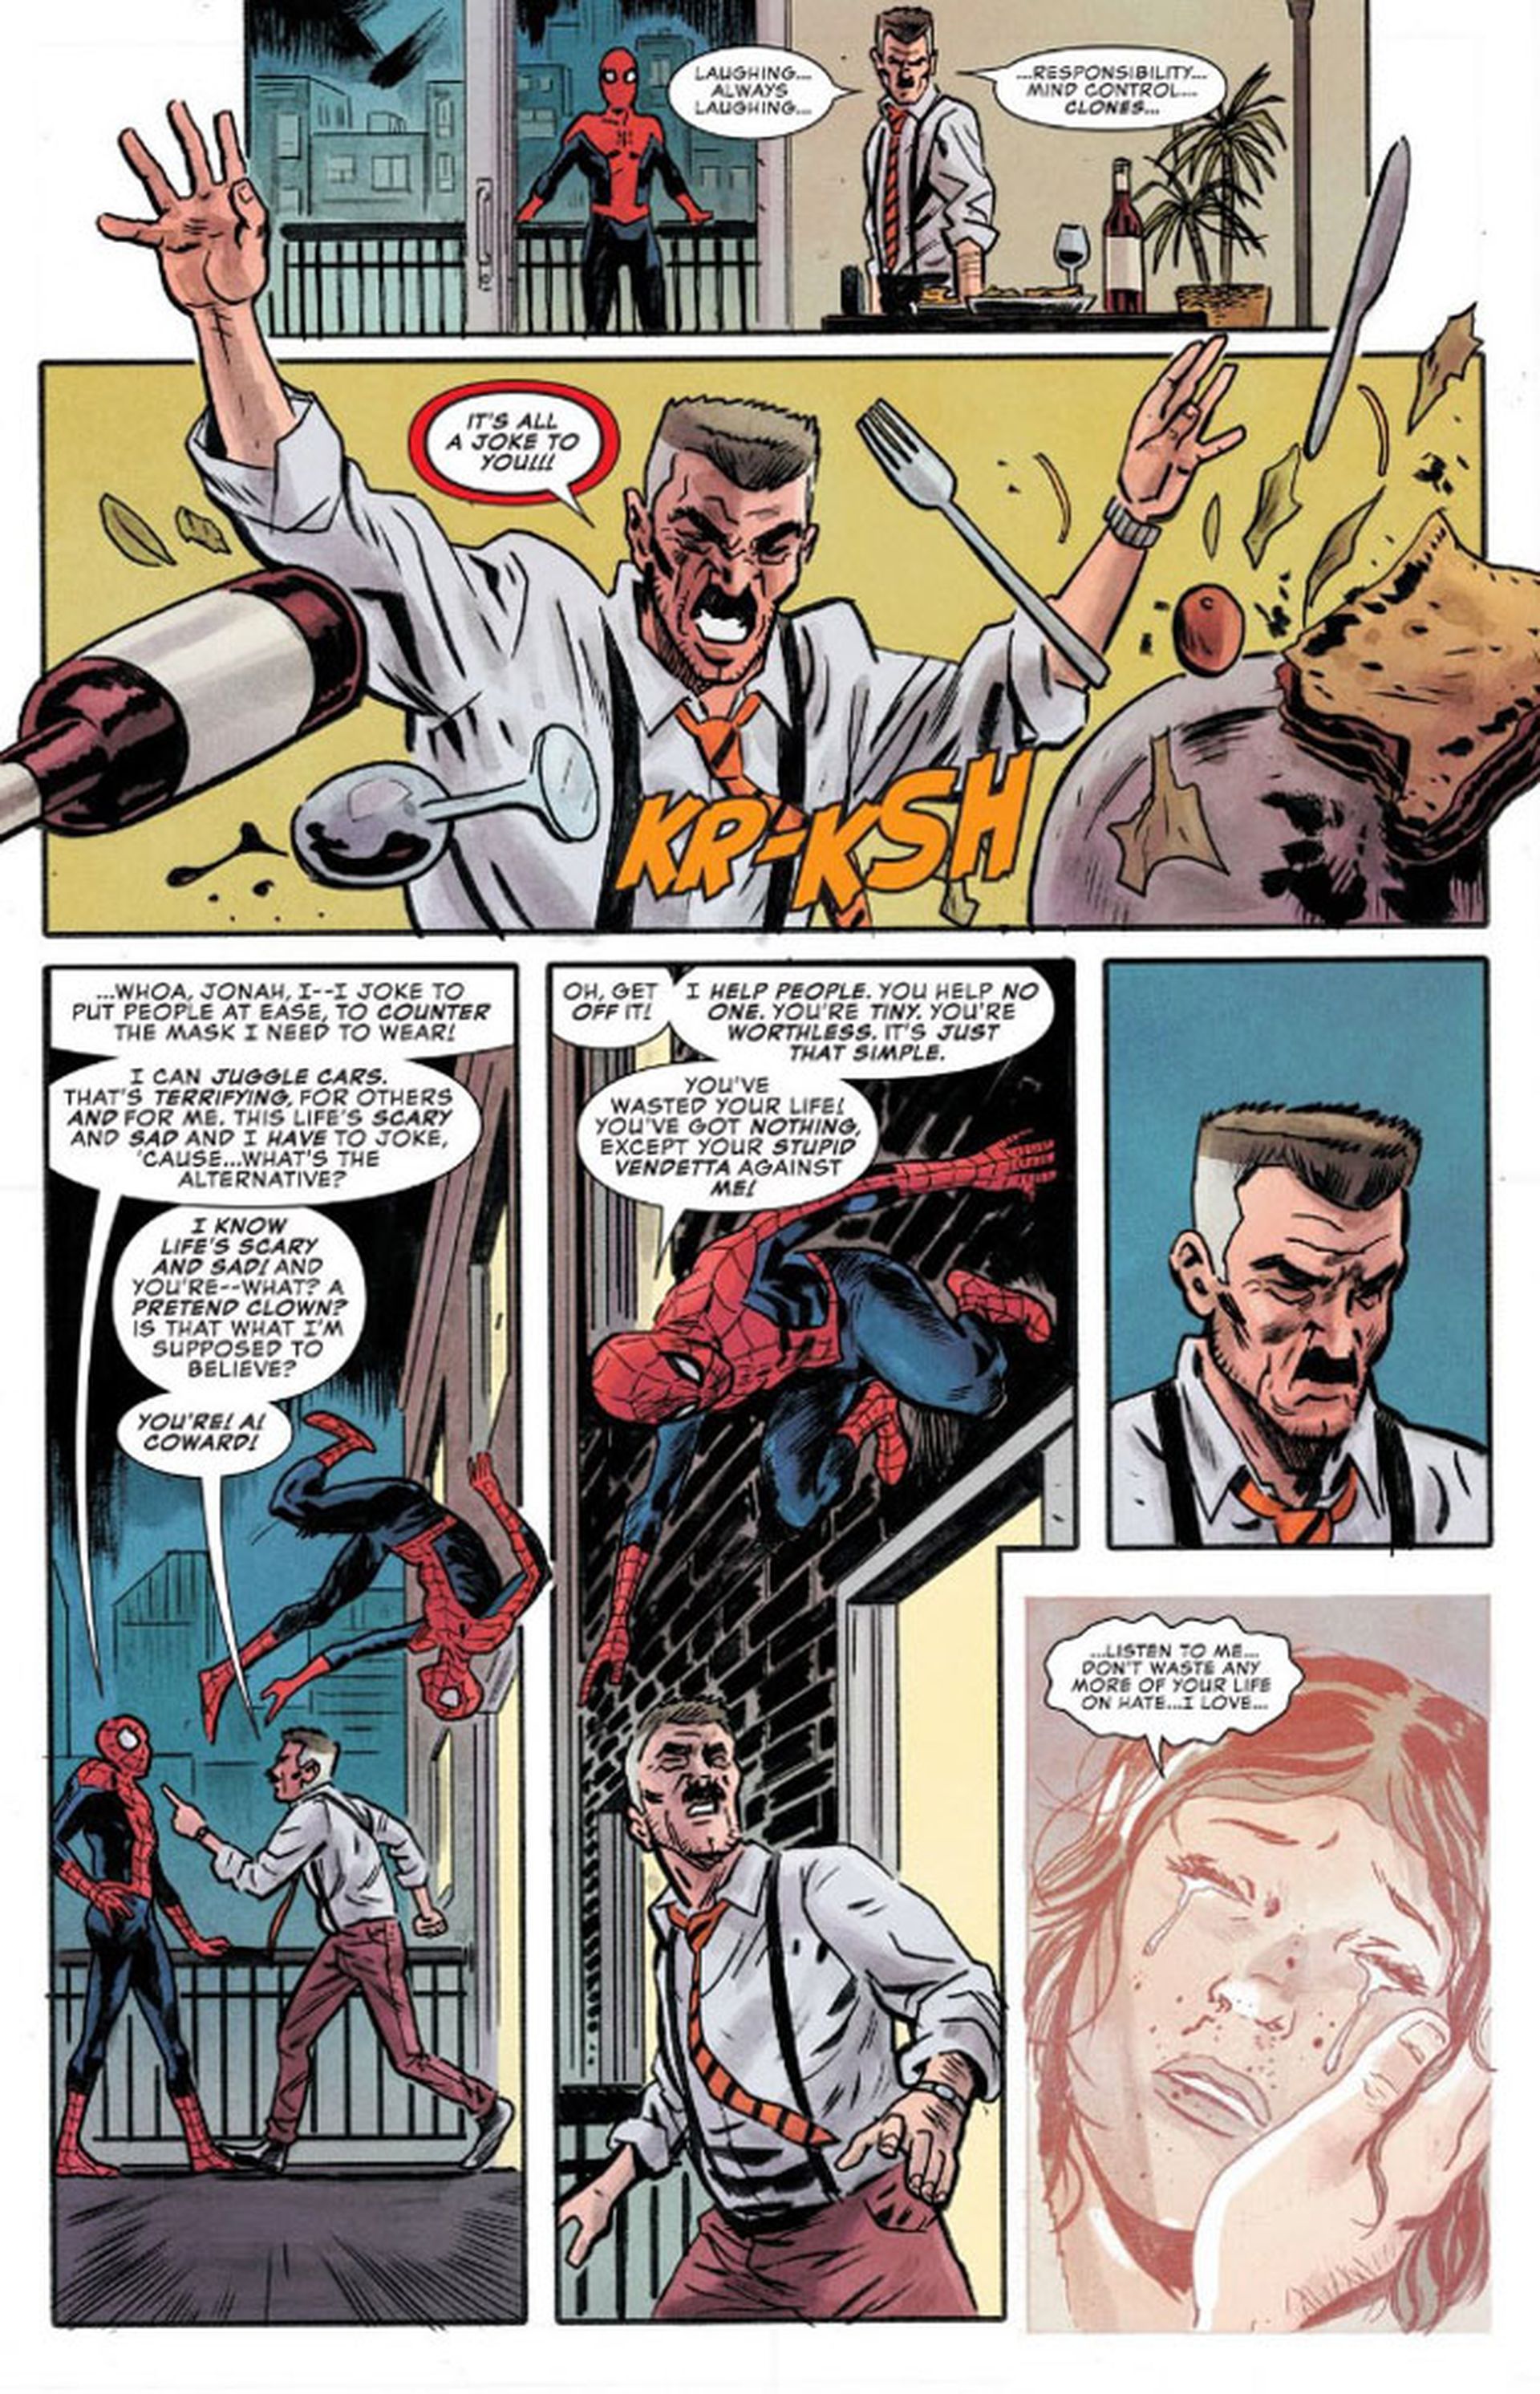 The Spectacular Spider-Man #6